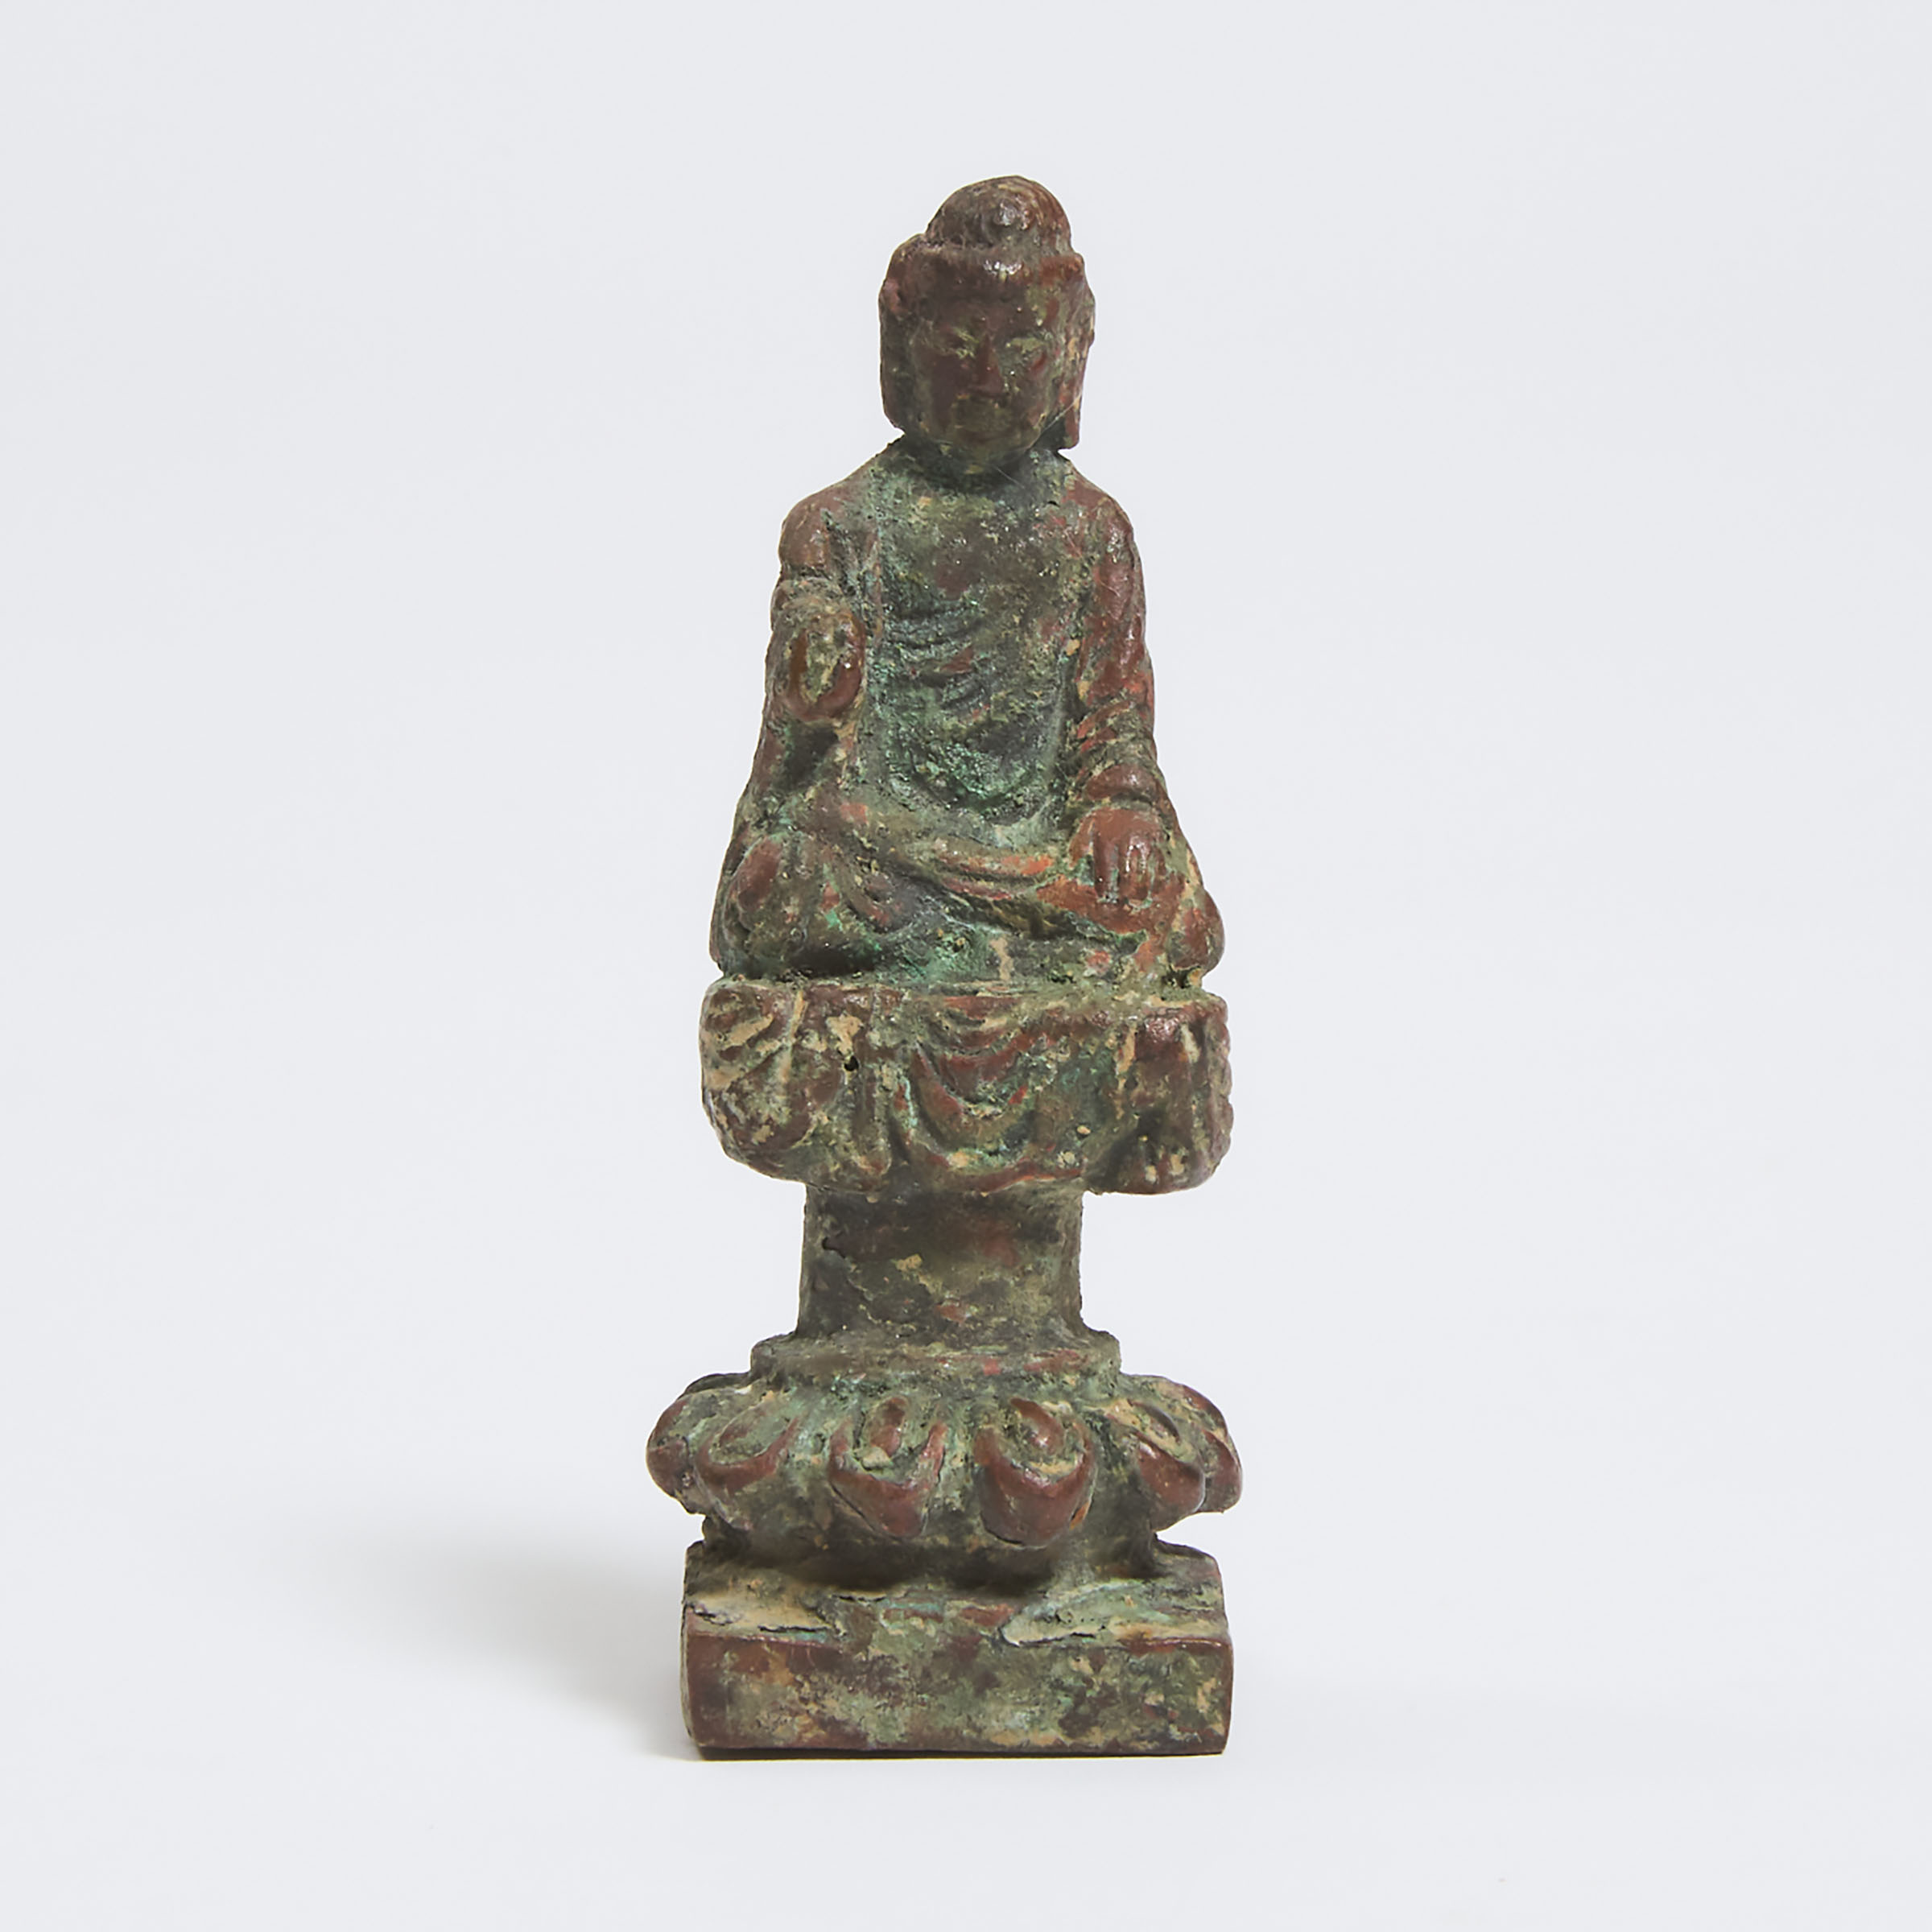 A Small Bronze Figure of a Seated Buddha, Tang Dynasty (AD 618-907)